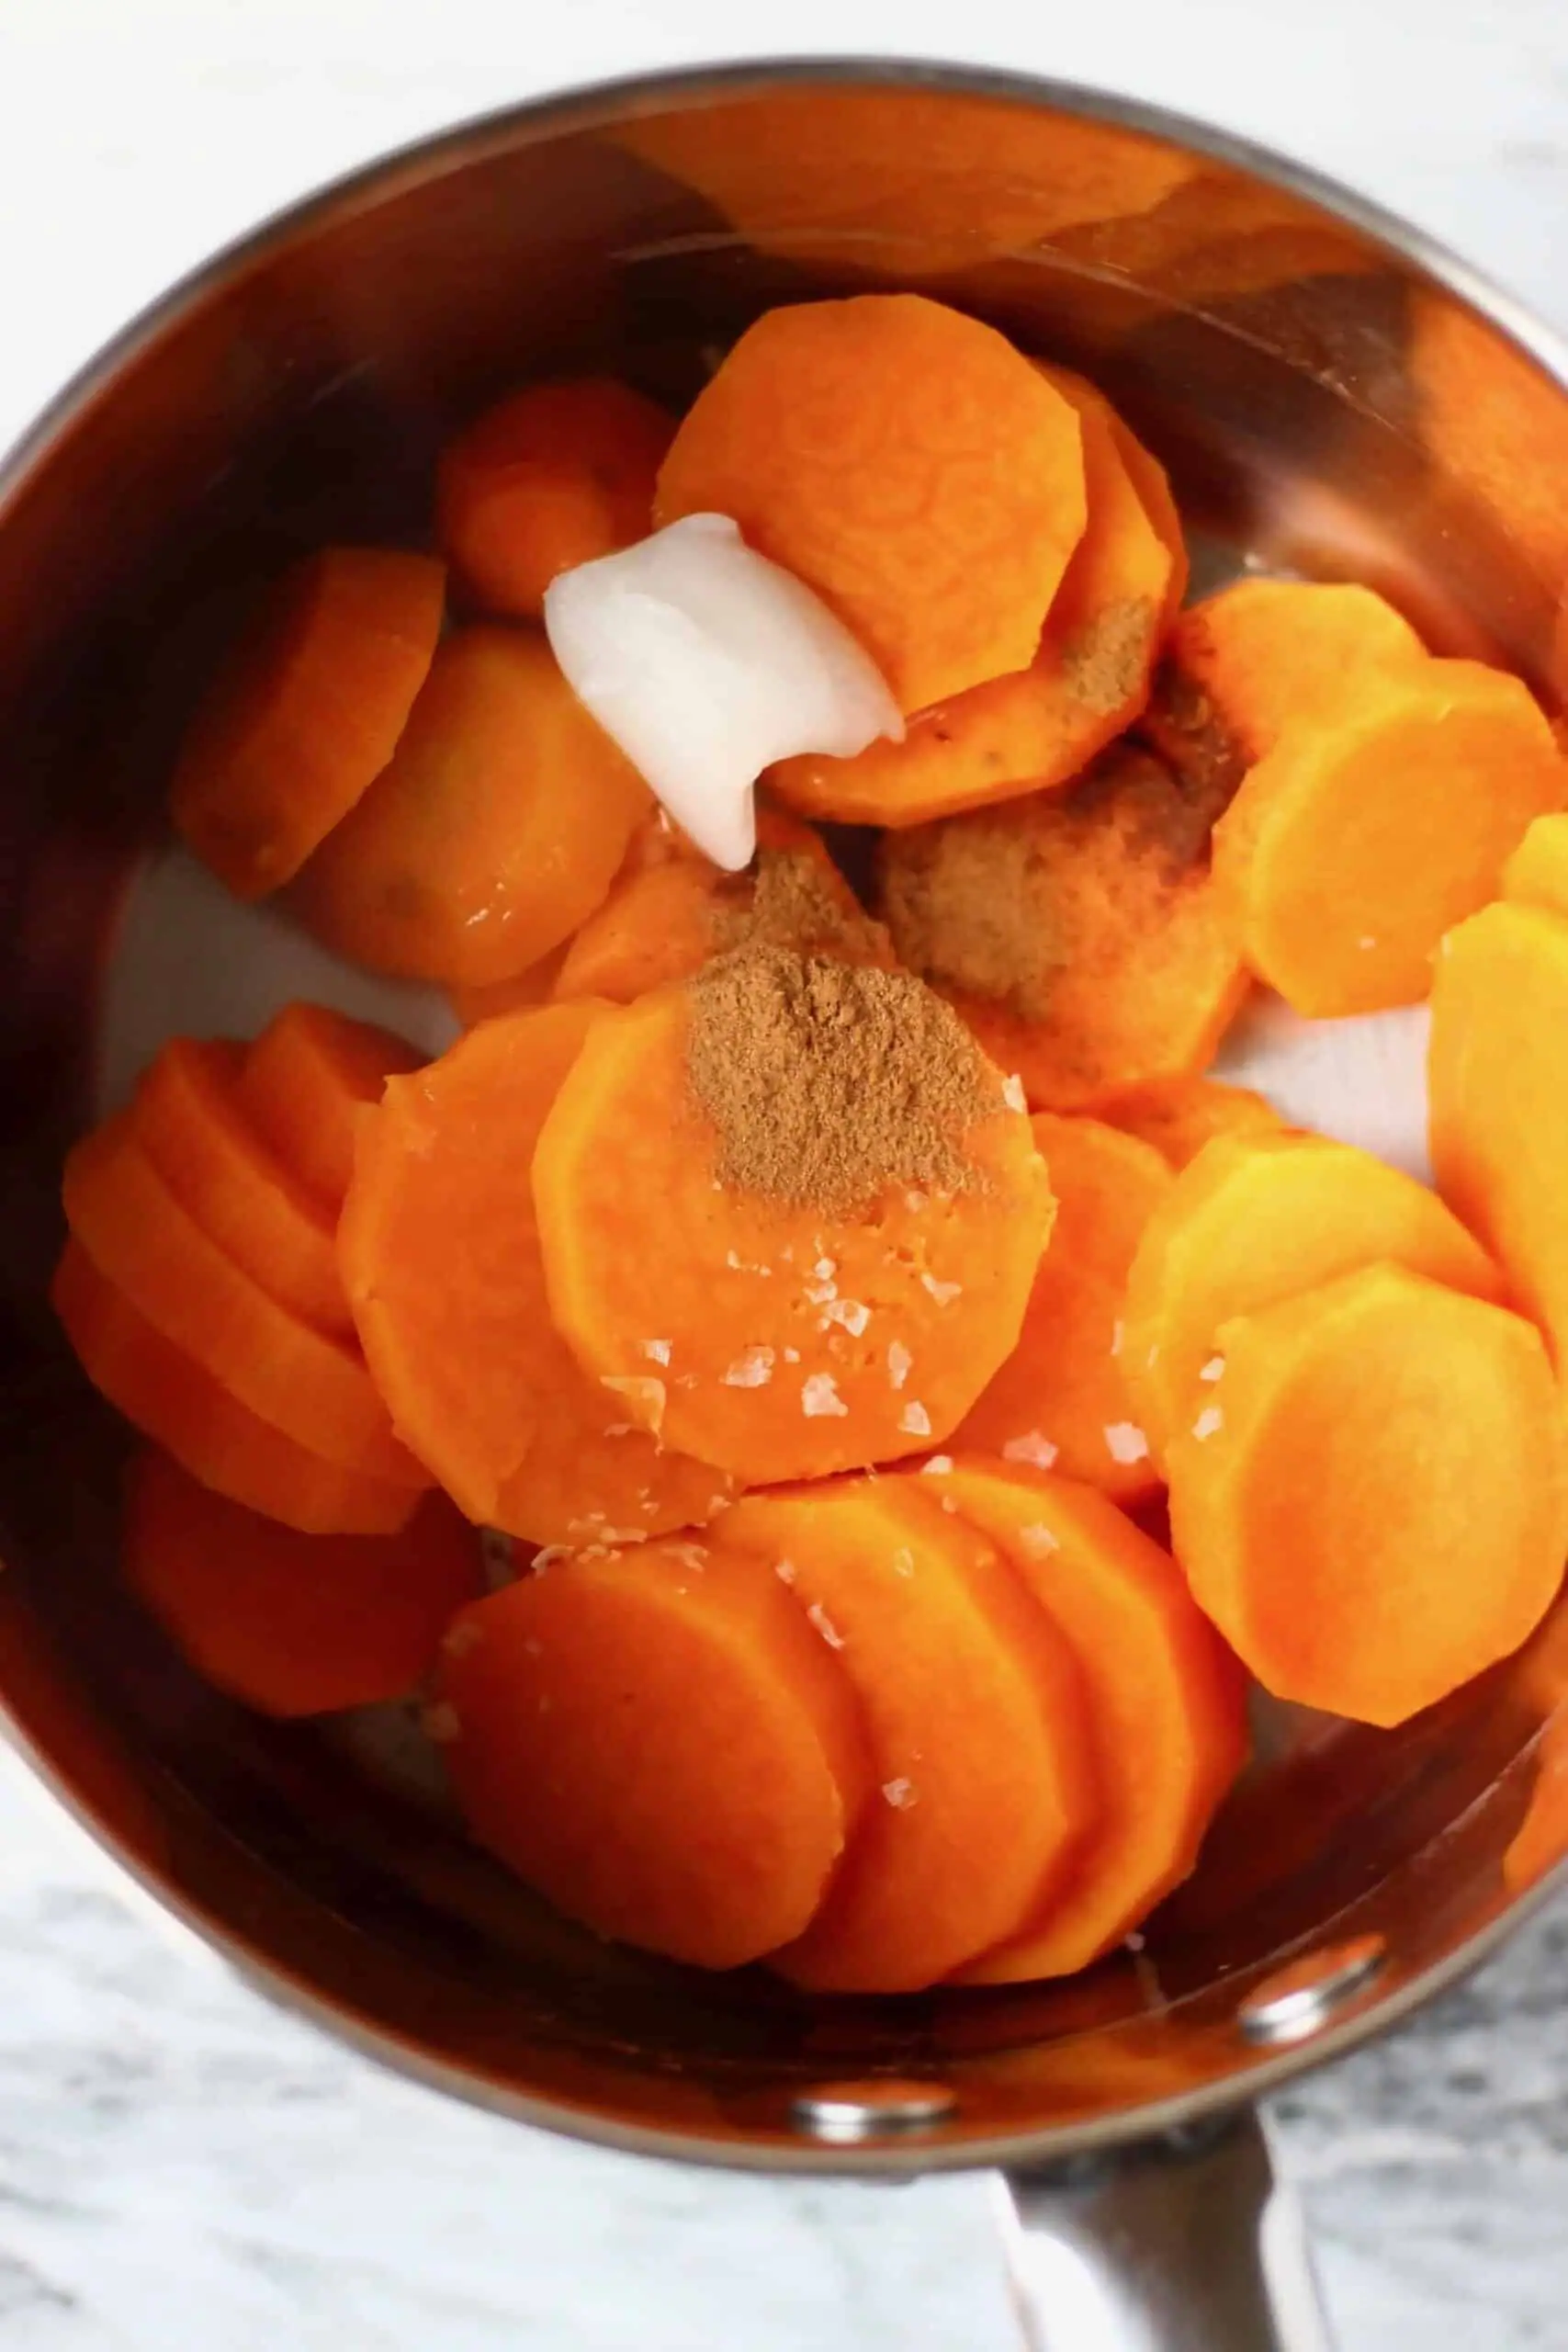 Cooked sweet potatoes, coconut oil and spices in a pan